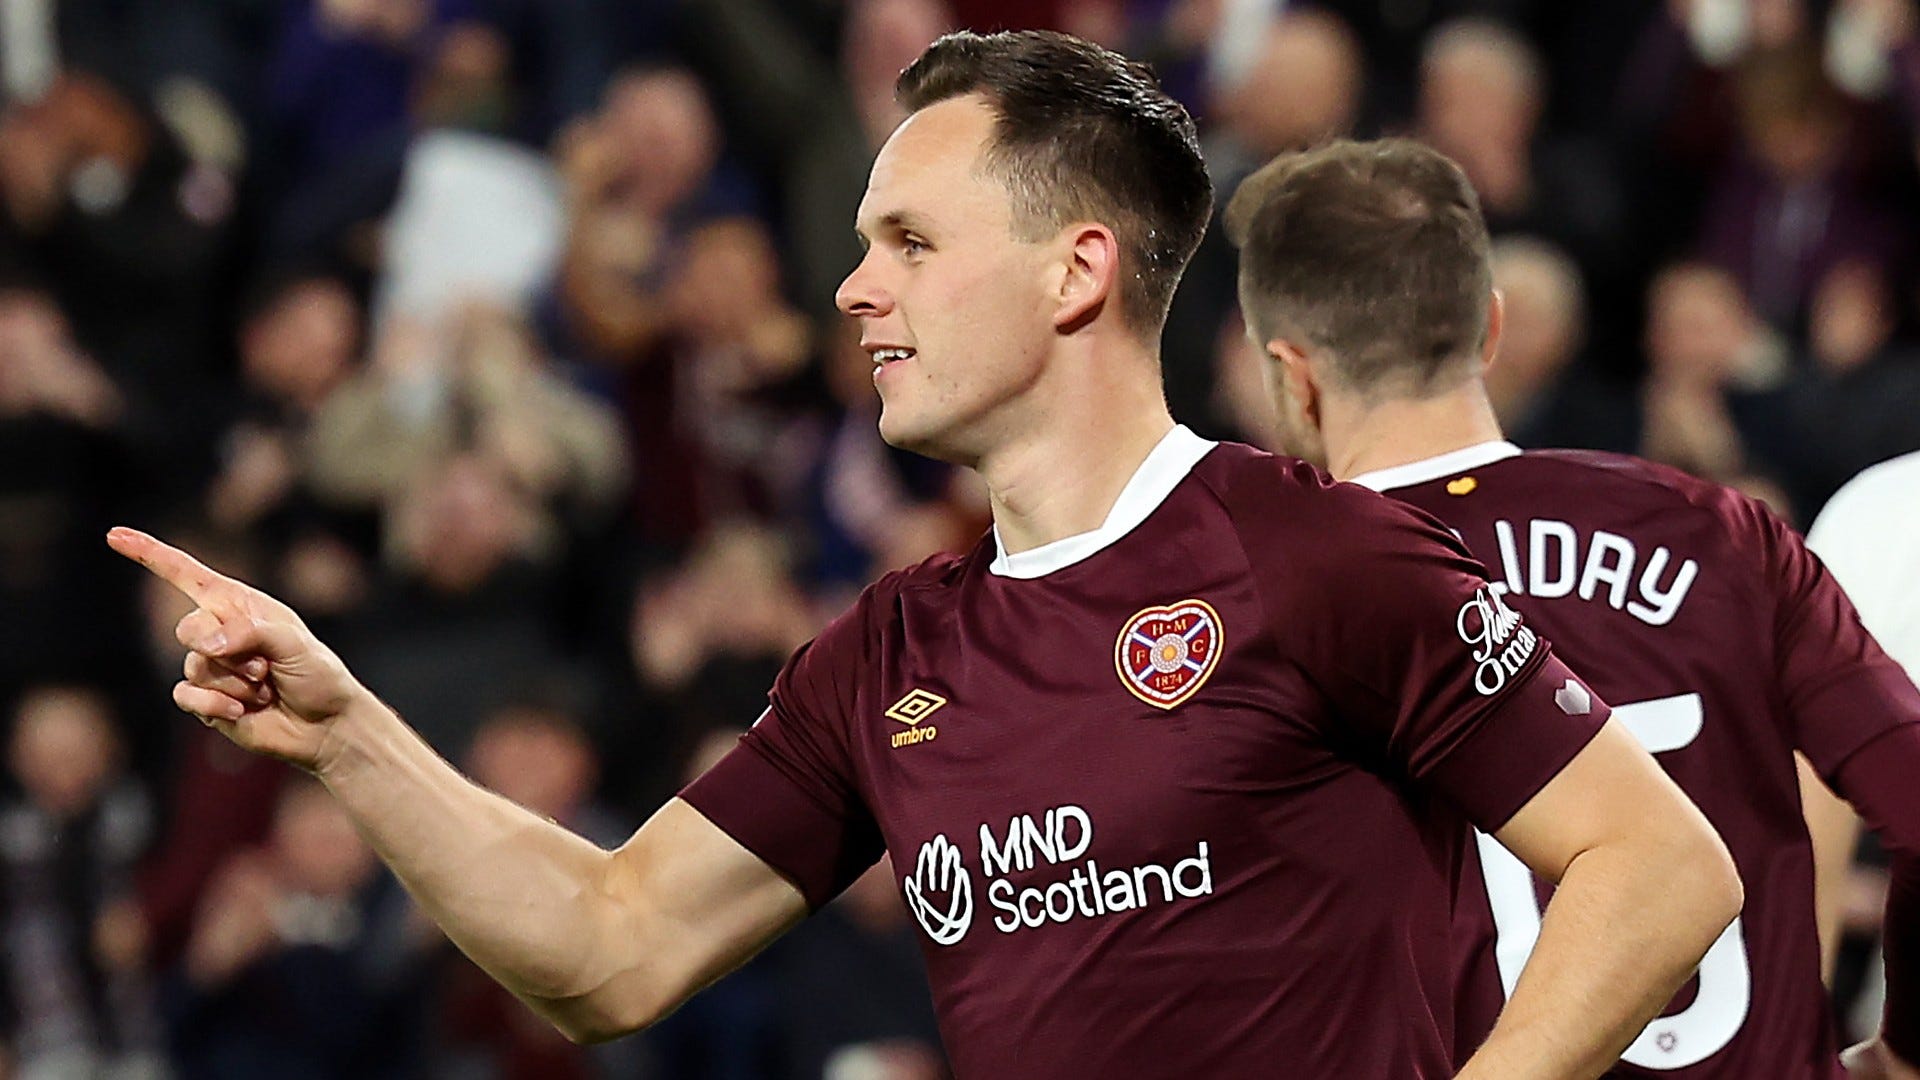 Rosenborg vs Hearts Live stream, TV channel, kick-off time and where to watch Goal US